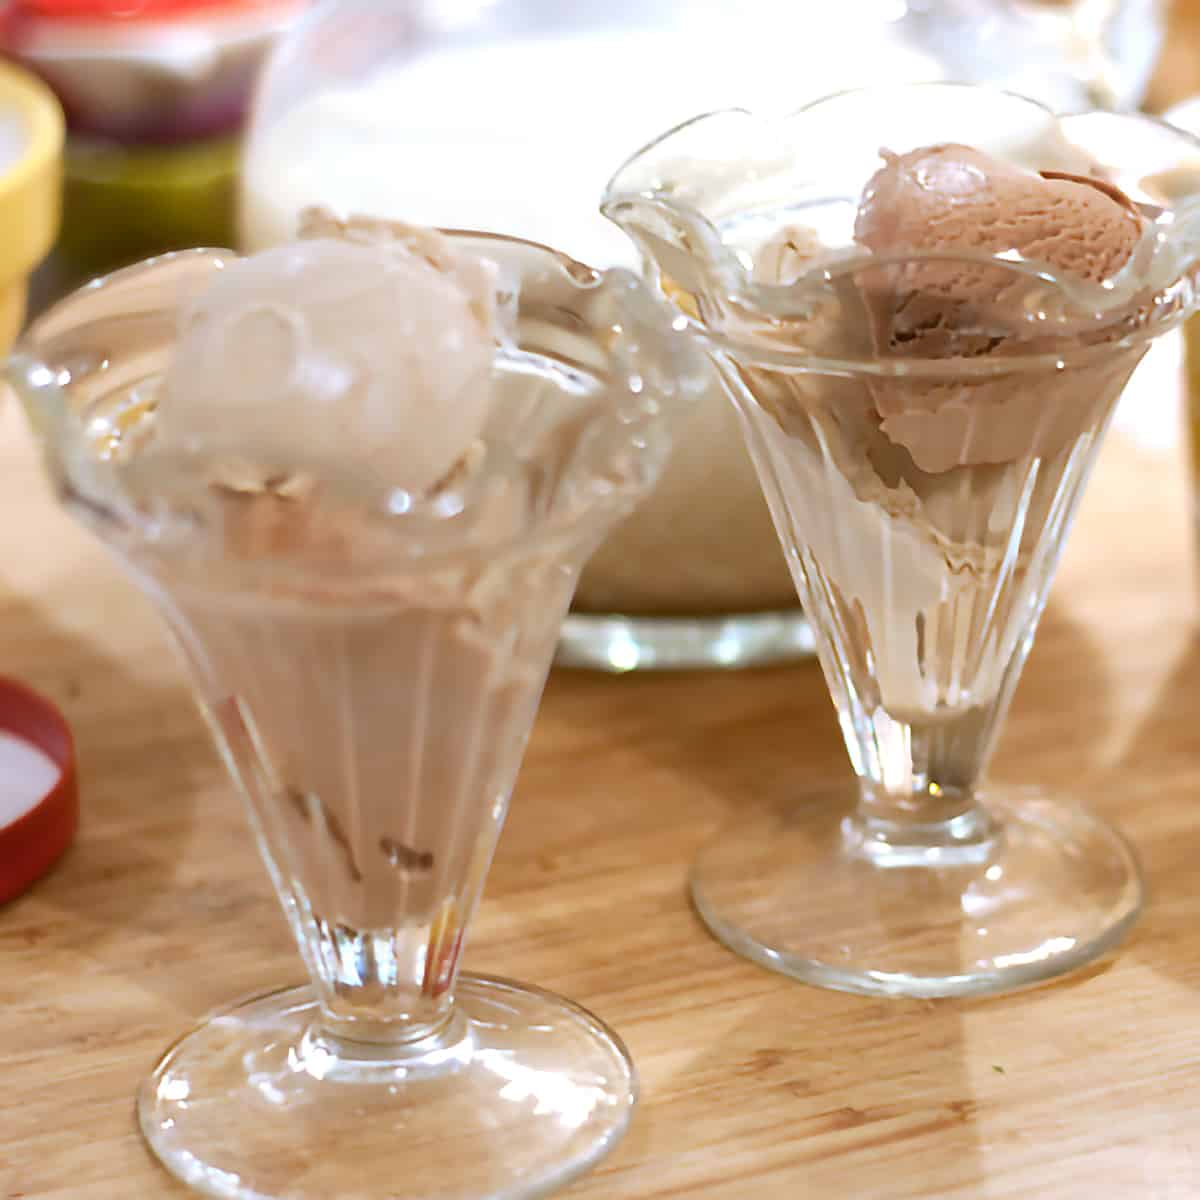 Scoops of ice cream in vintage serving glasses.